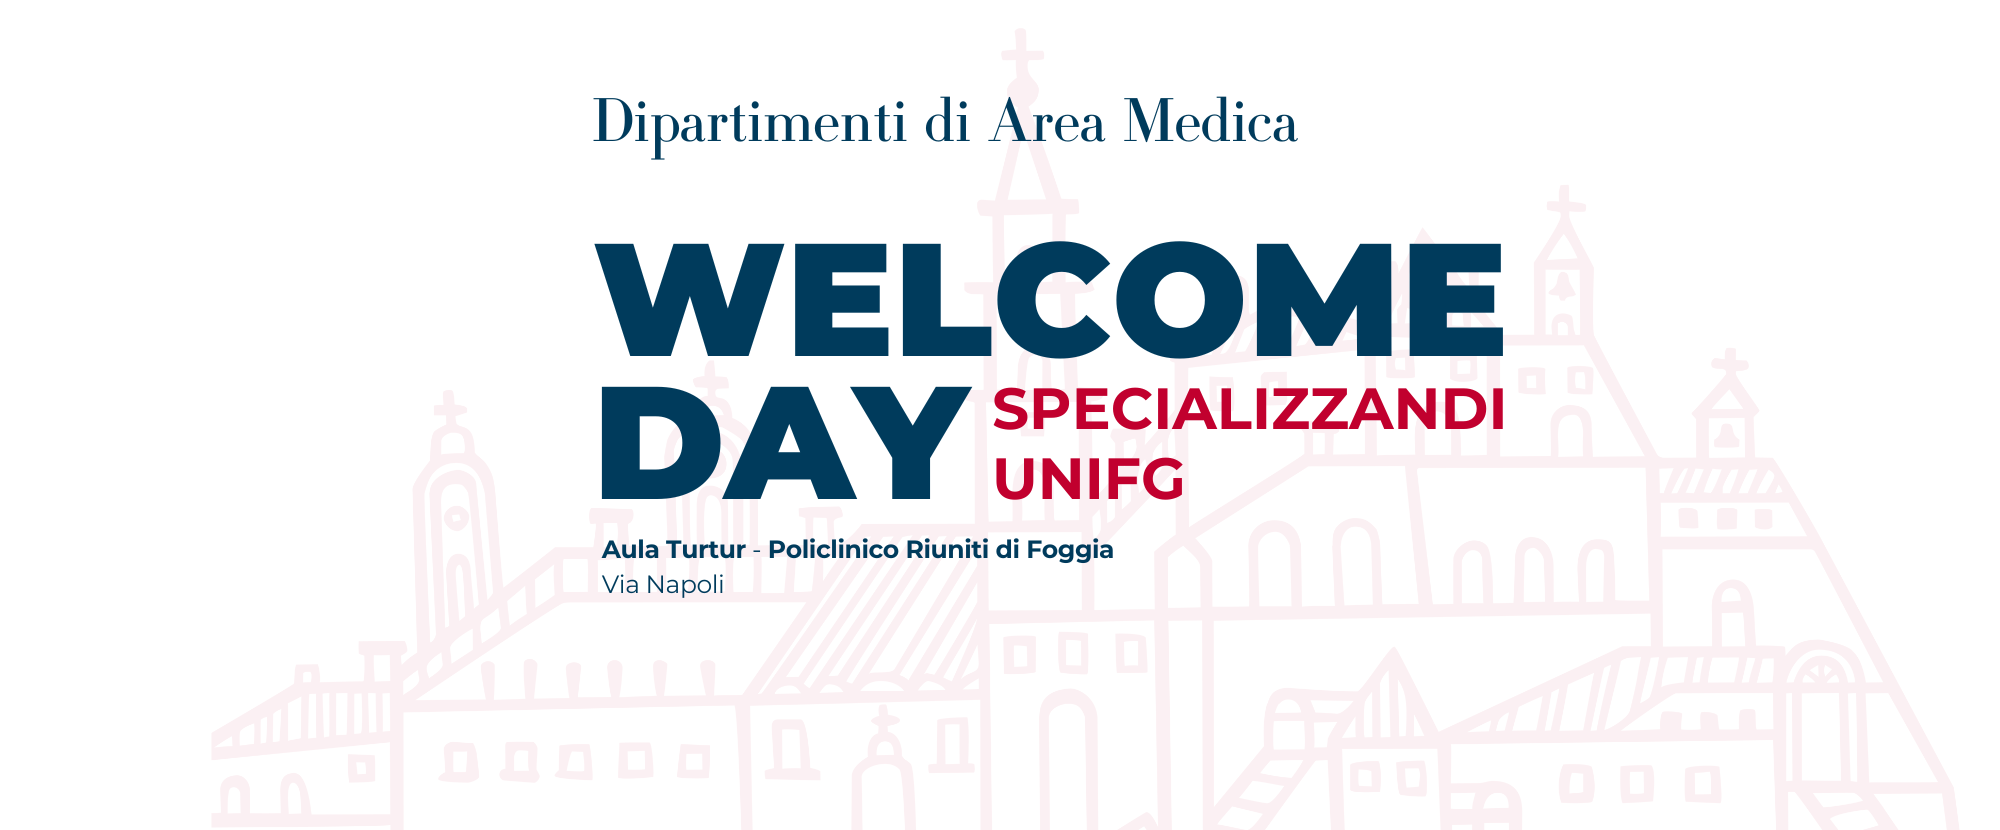 Welcome day specializzandiunifg